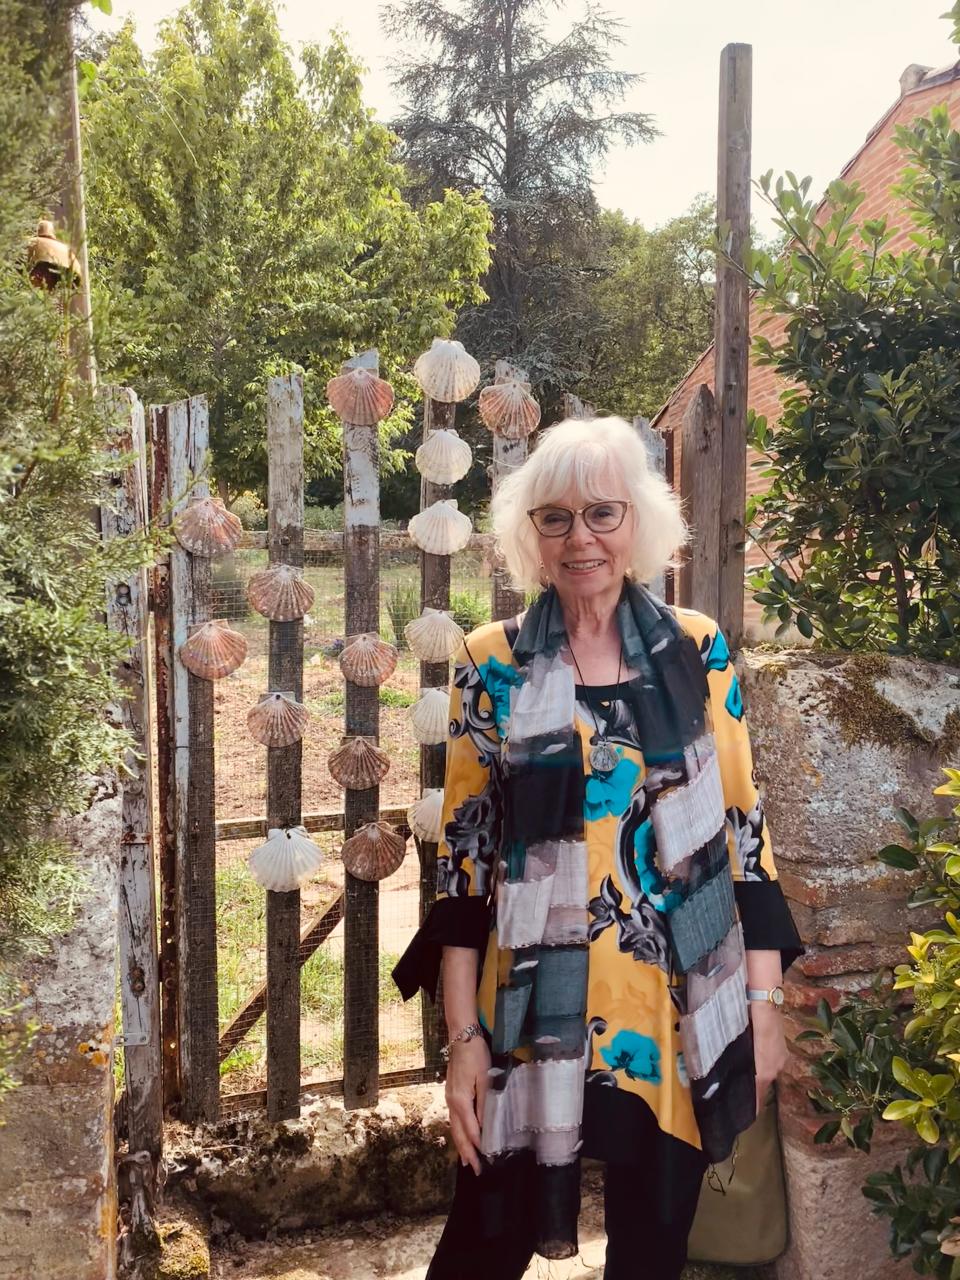 Linda Parsons just got back from two weeks as a Fellow for the Virginia Center for the Creative Arts’ writing program in Auvillar, France. Her new book is her first collection that includes both poems and prose.